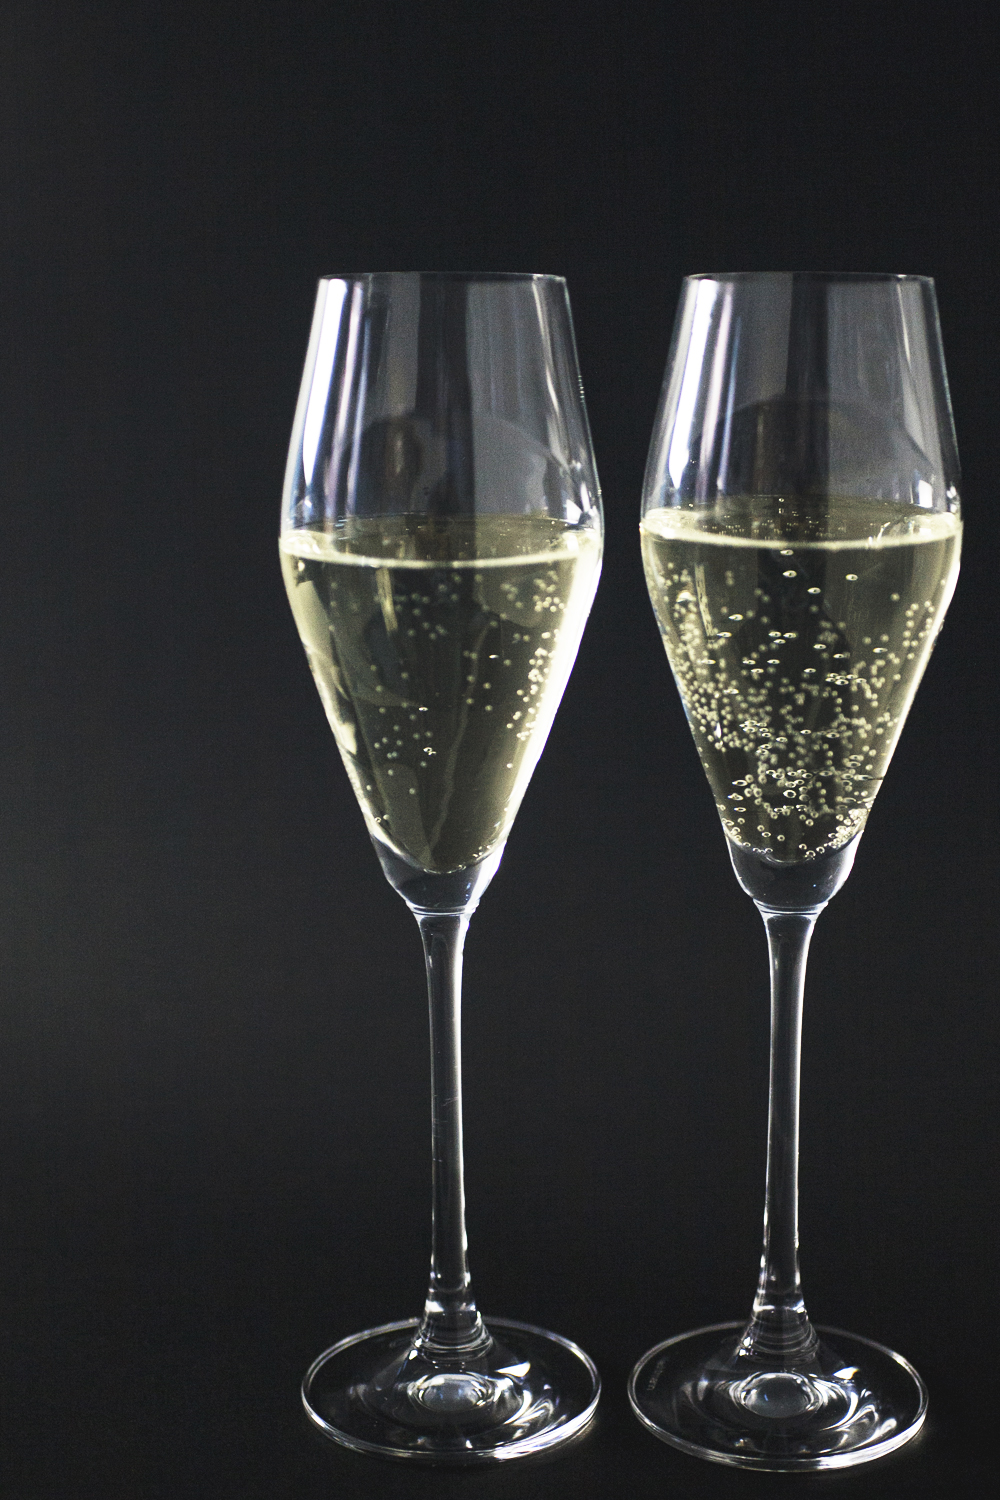 two diamond-shaped stemmed champagne glasses filled halfway with sparkling wine against black background